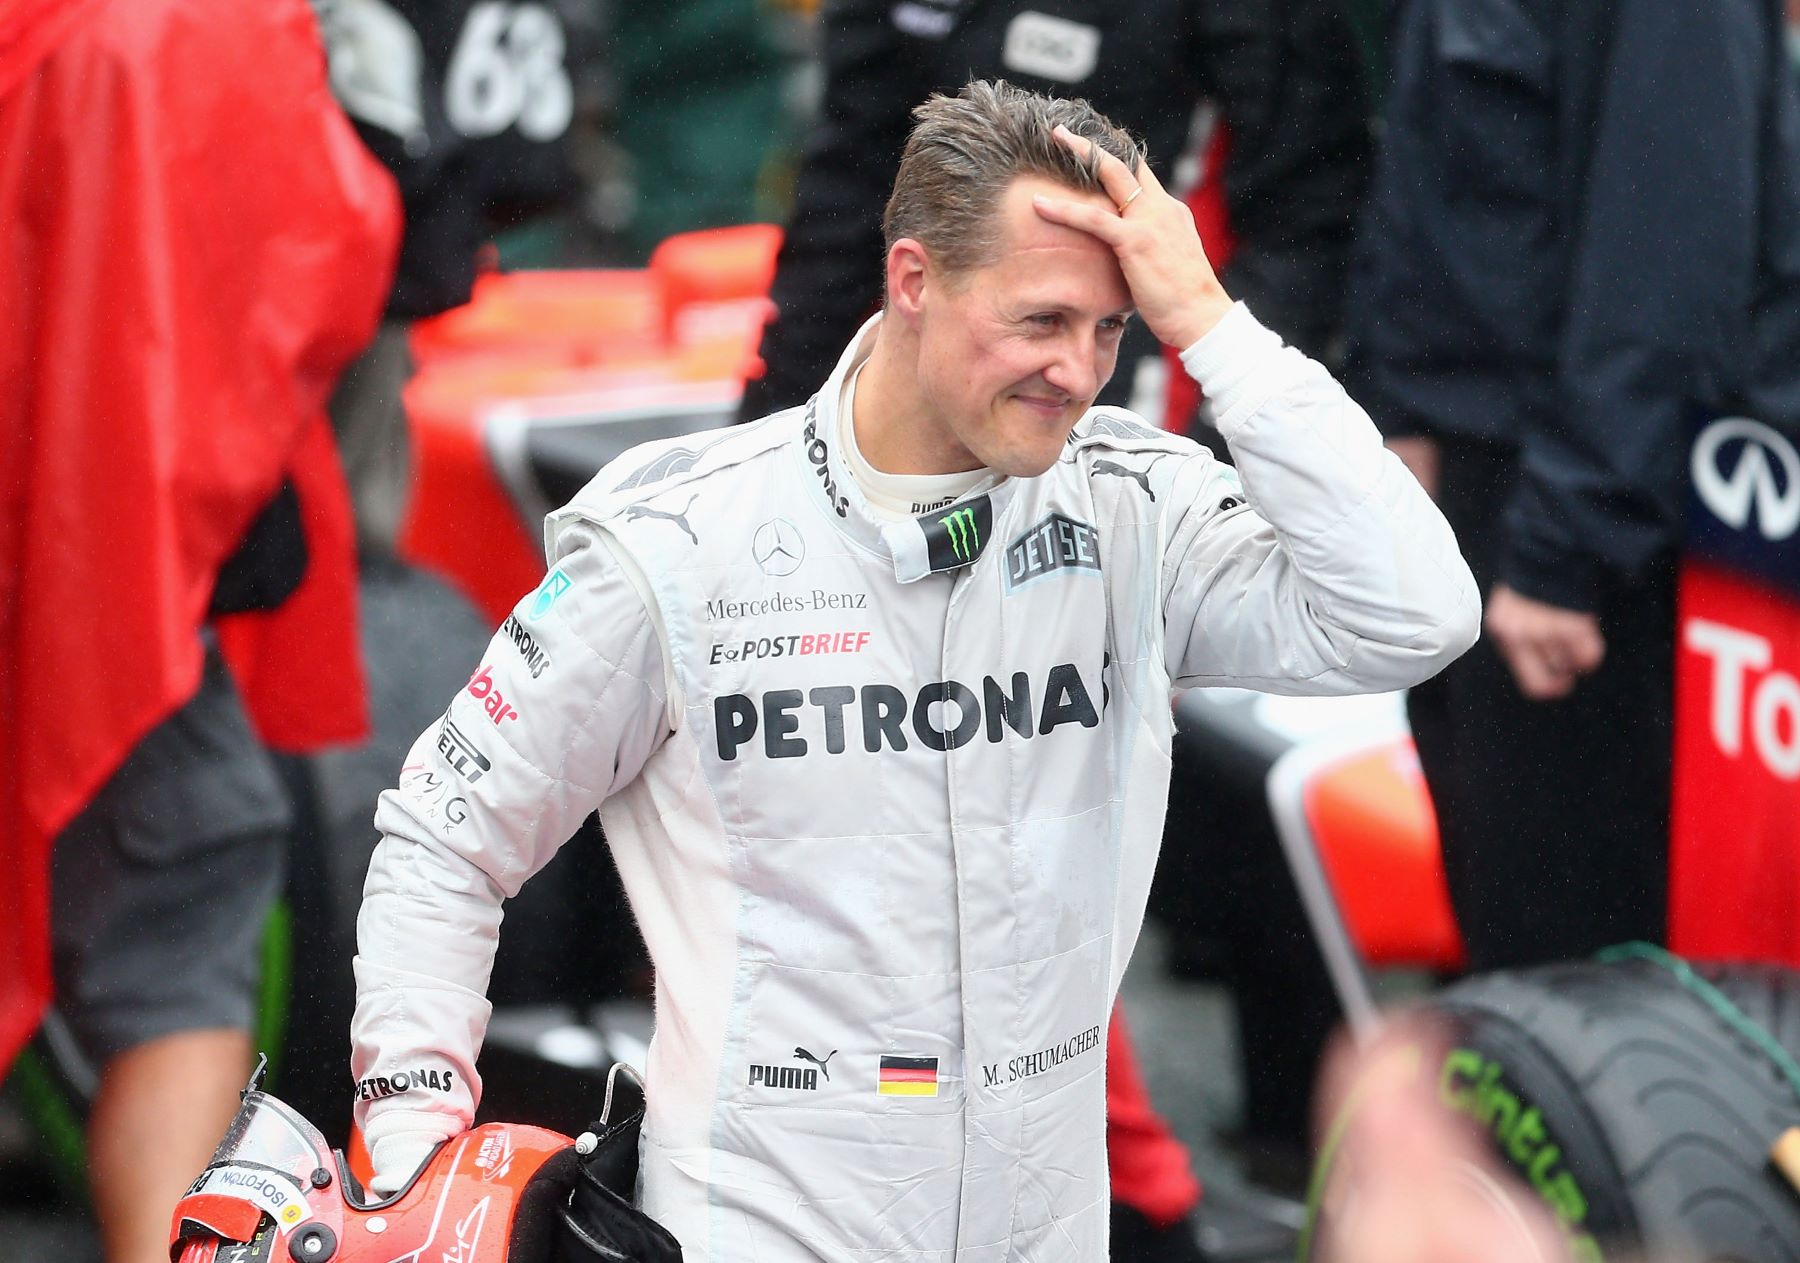 Michael Schumacher’s Wife Reveals He Almost Avoided the Terrible Accident That Left Him Brain Damaged